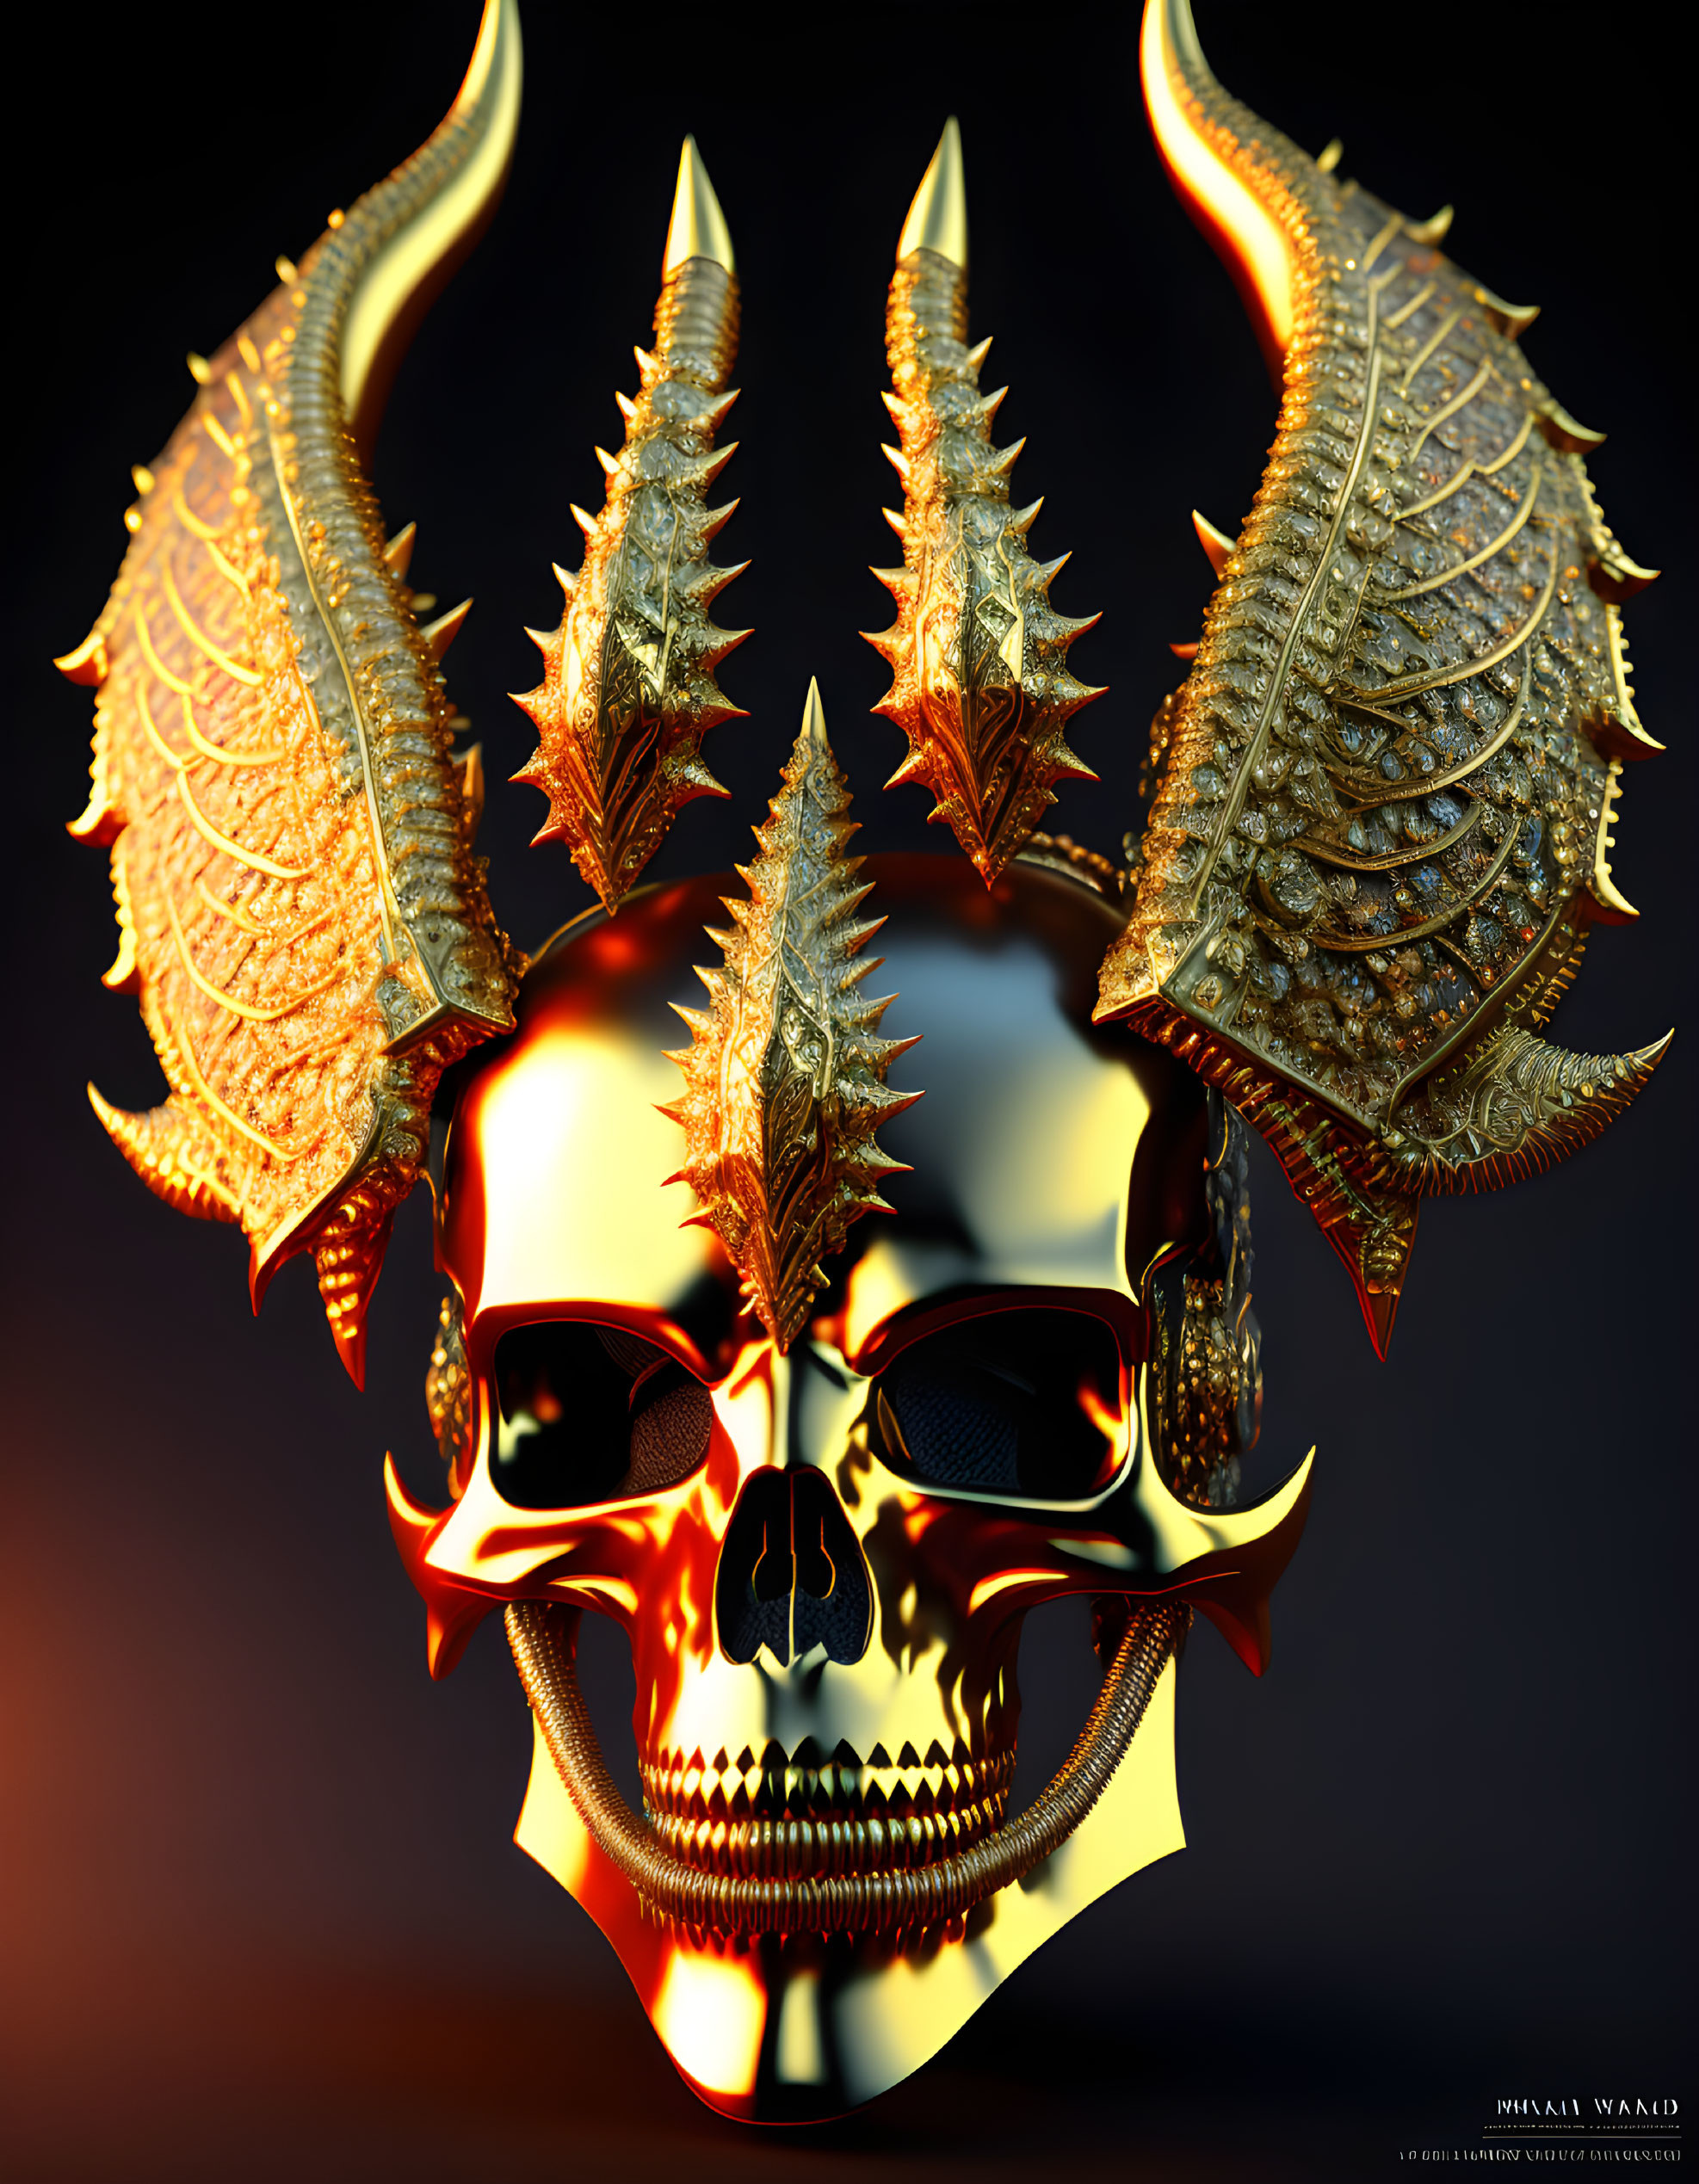 Golden skull with wings, flaming eyes, and ornate horns in 3D rendering